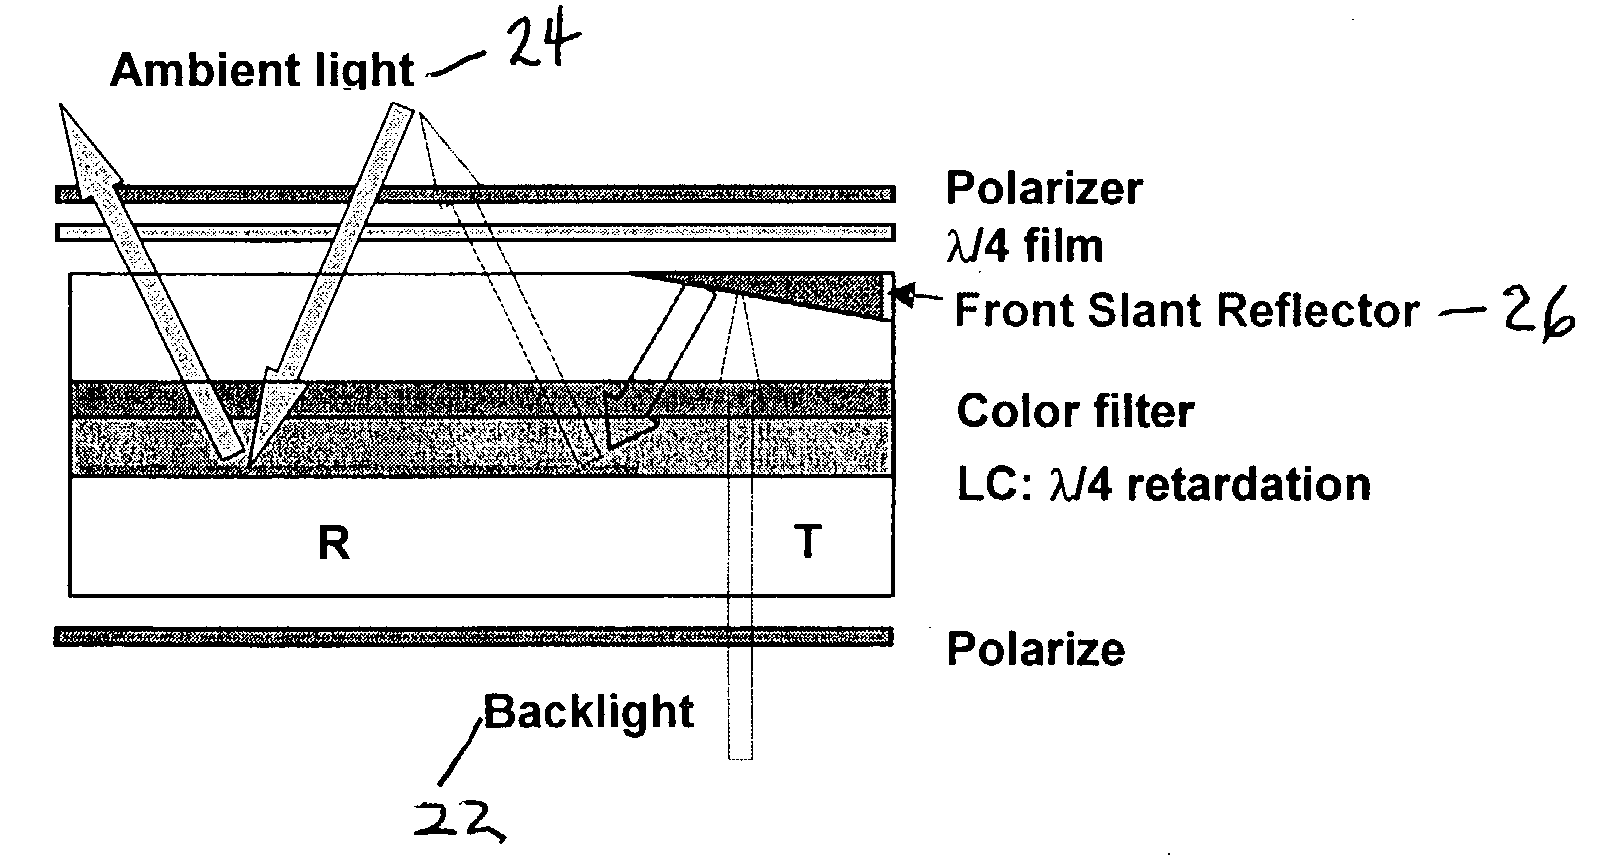 Single cell gap transflective liquid crystal display with slanted reflector above transmissive pixels